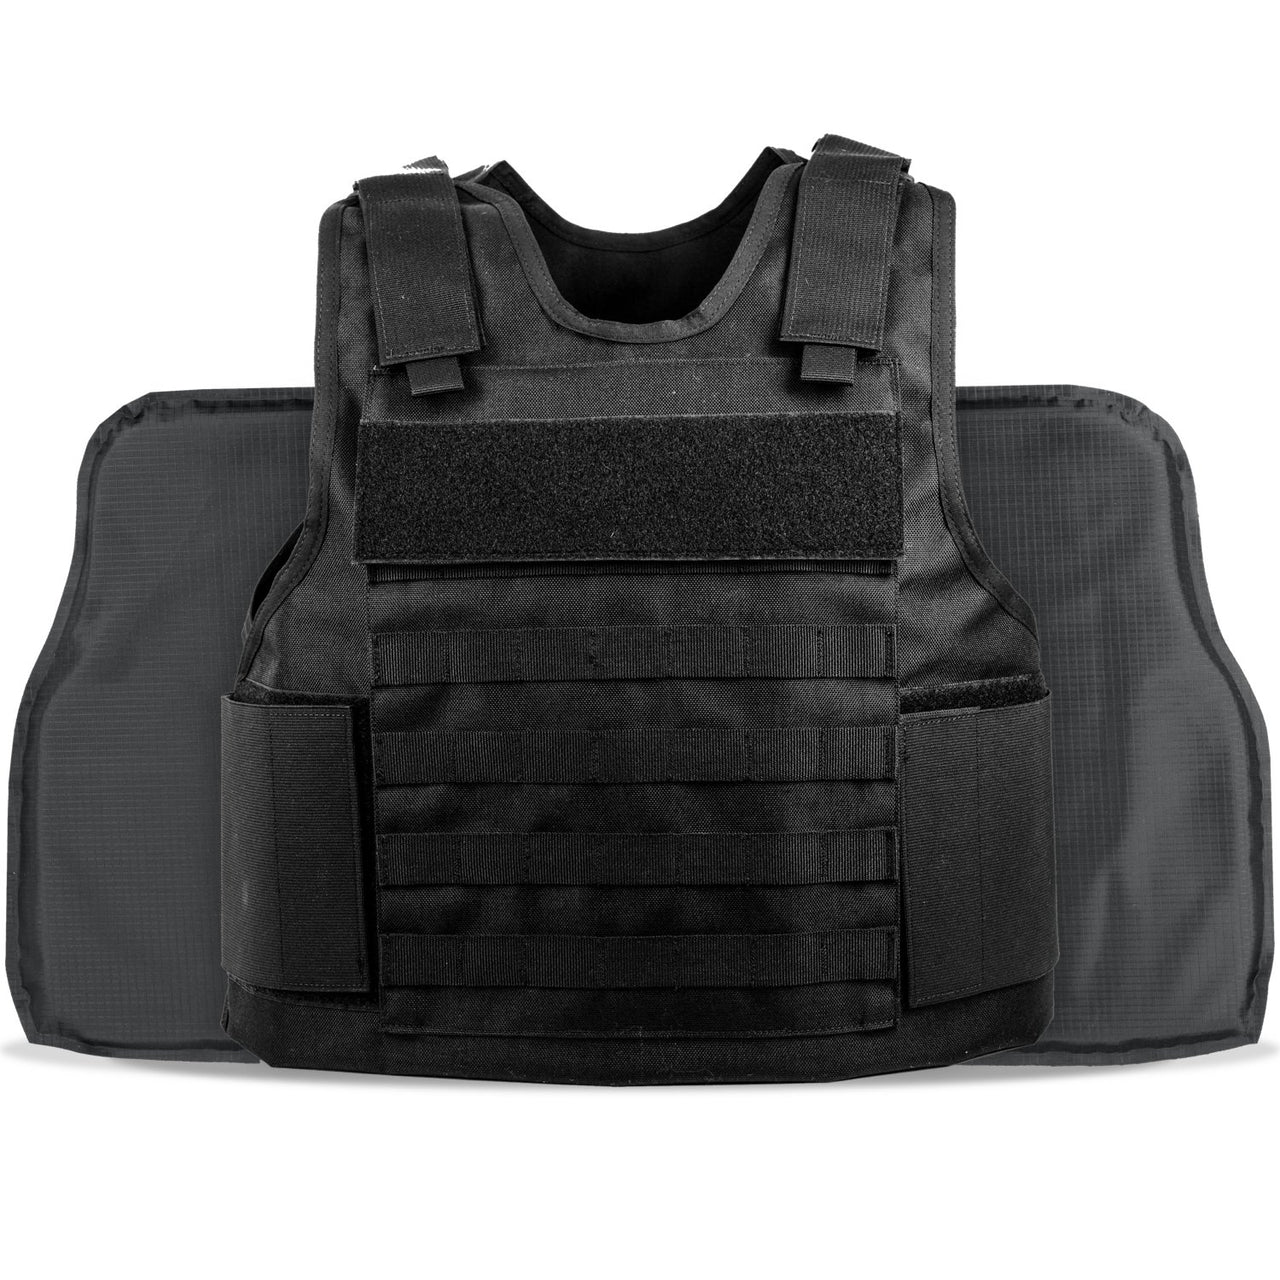 A Body Armor Direct All Star Tactical Enhanced Multi-Threat Vest from Body Armor Direct on a white background.